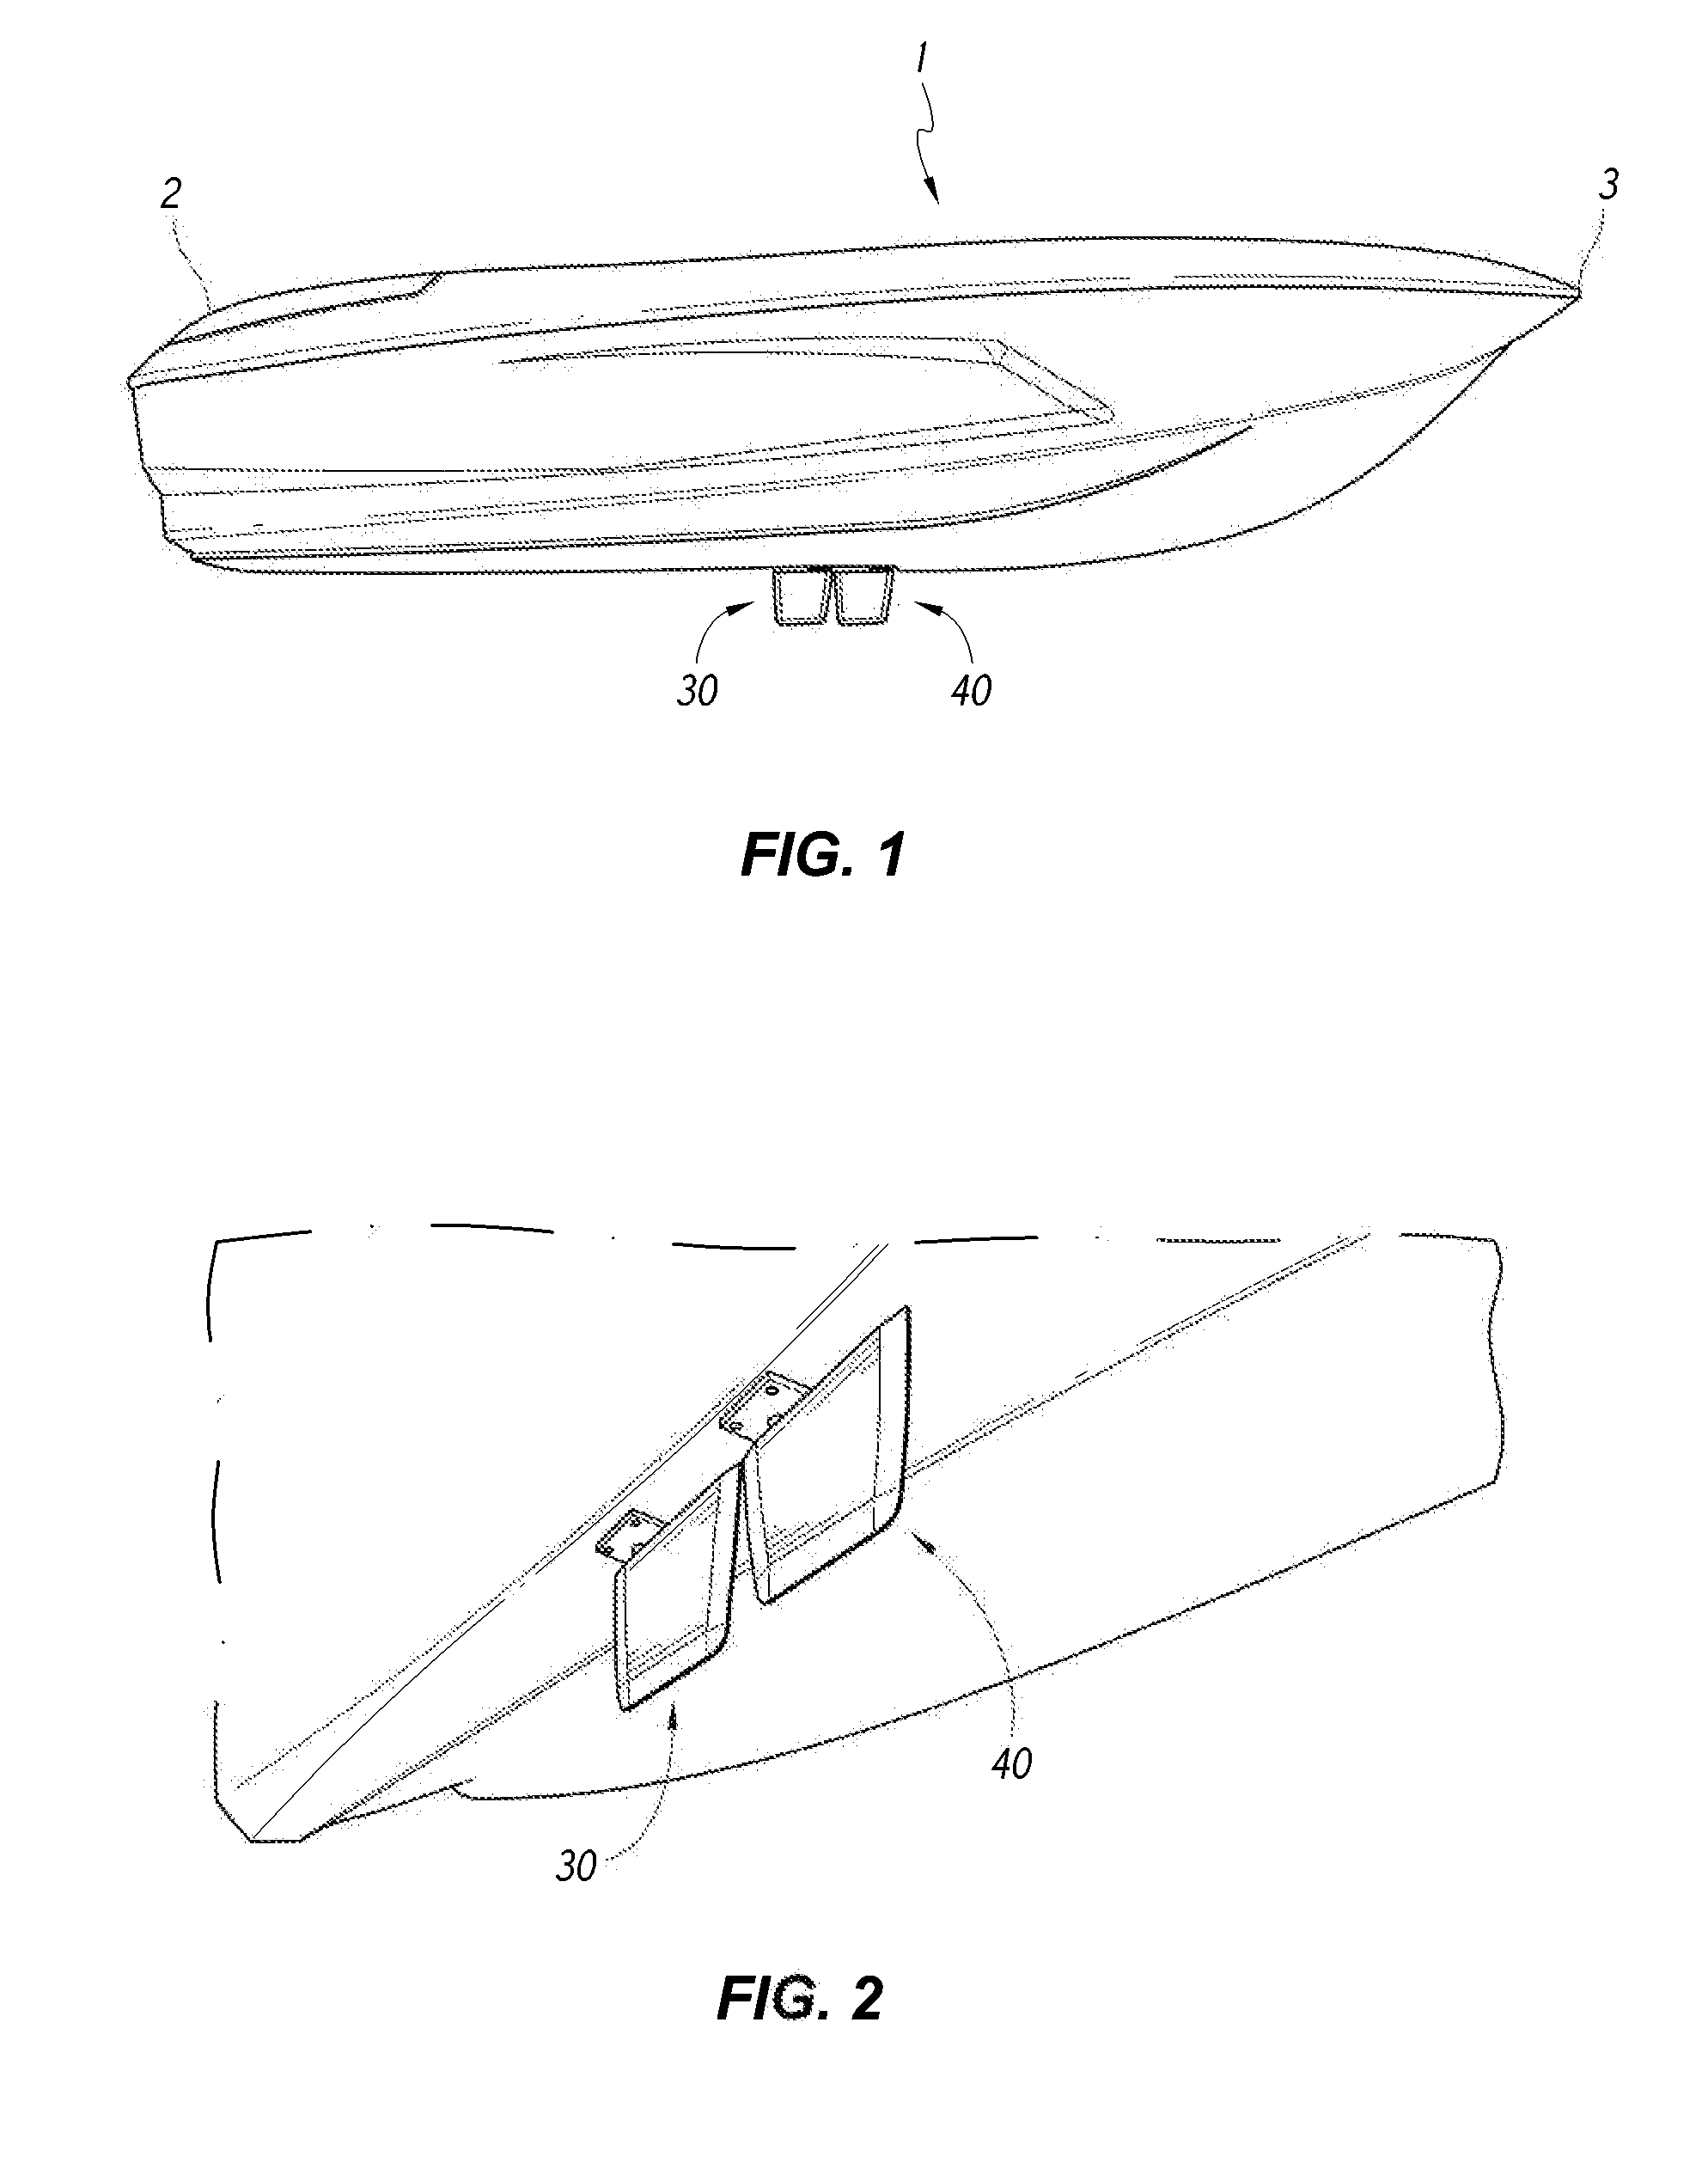 Surf wake system and method for a watercraft